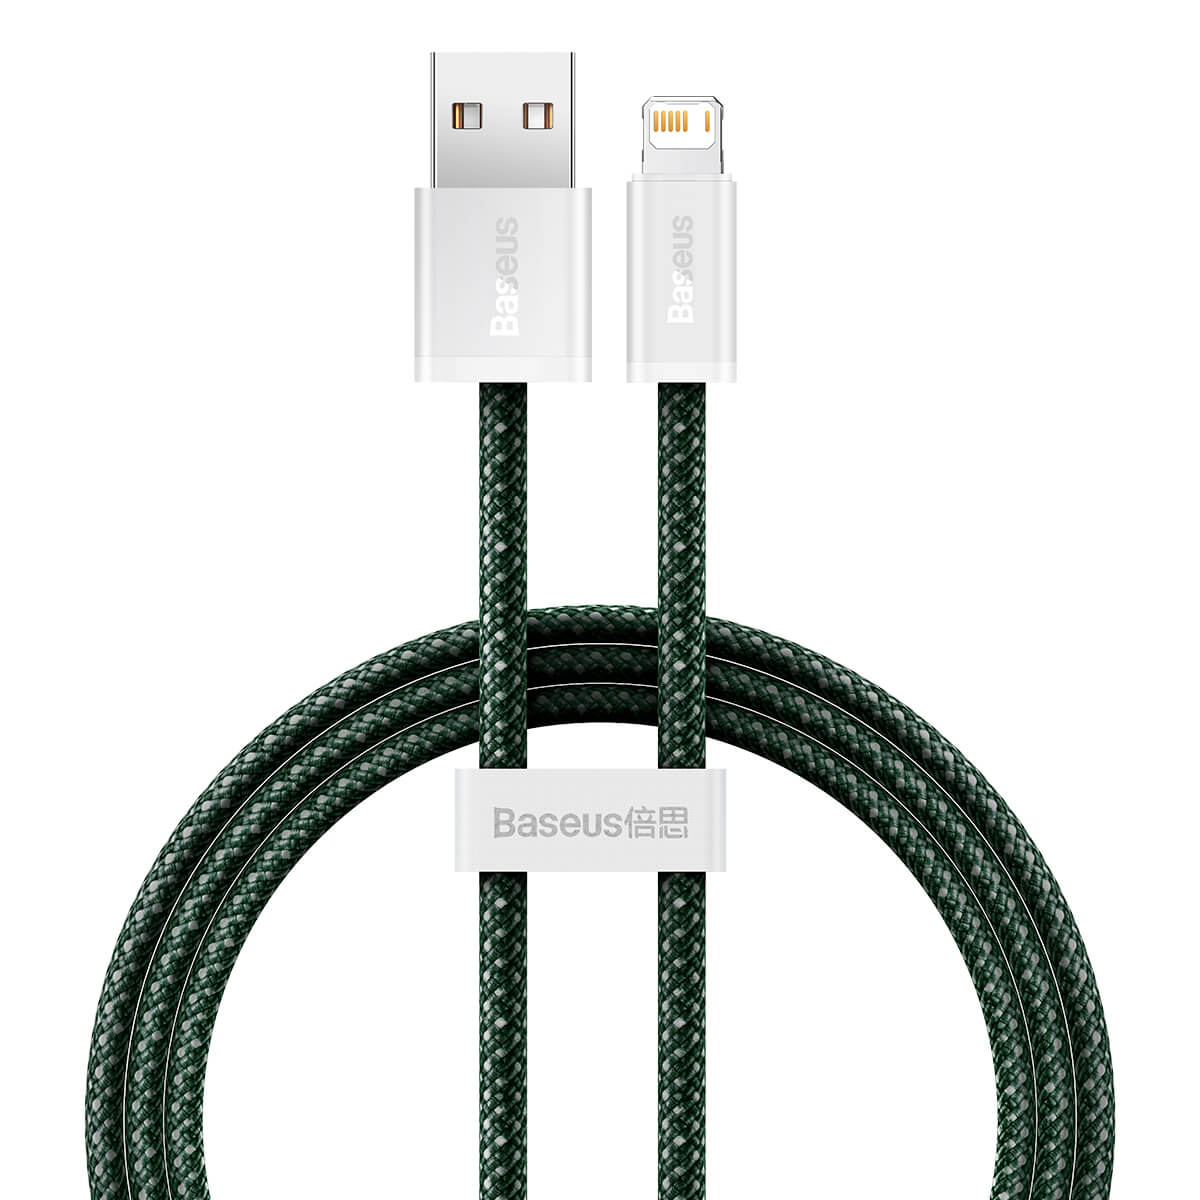 Baseus Dynamic 2 Series Fast Charging Data Cable USB to iPhone 2.4A